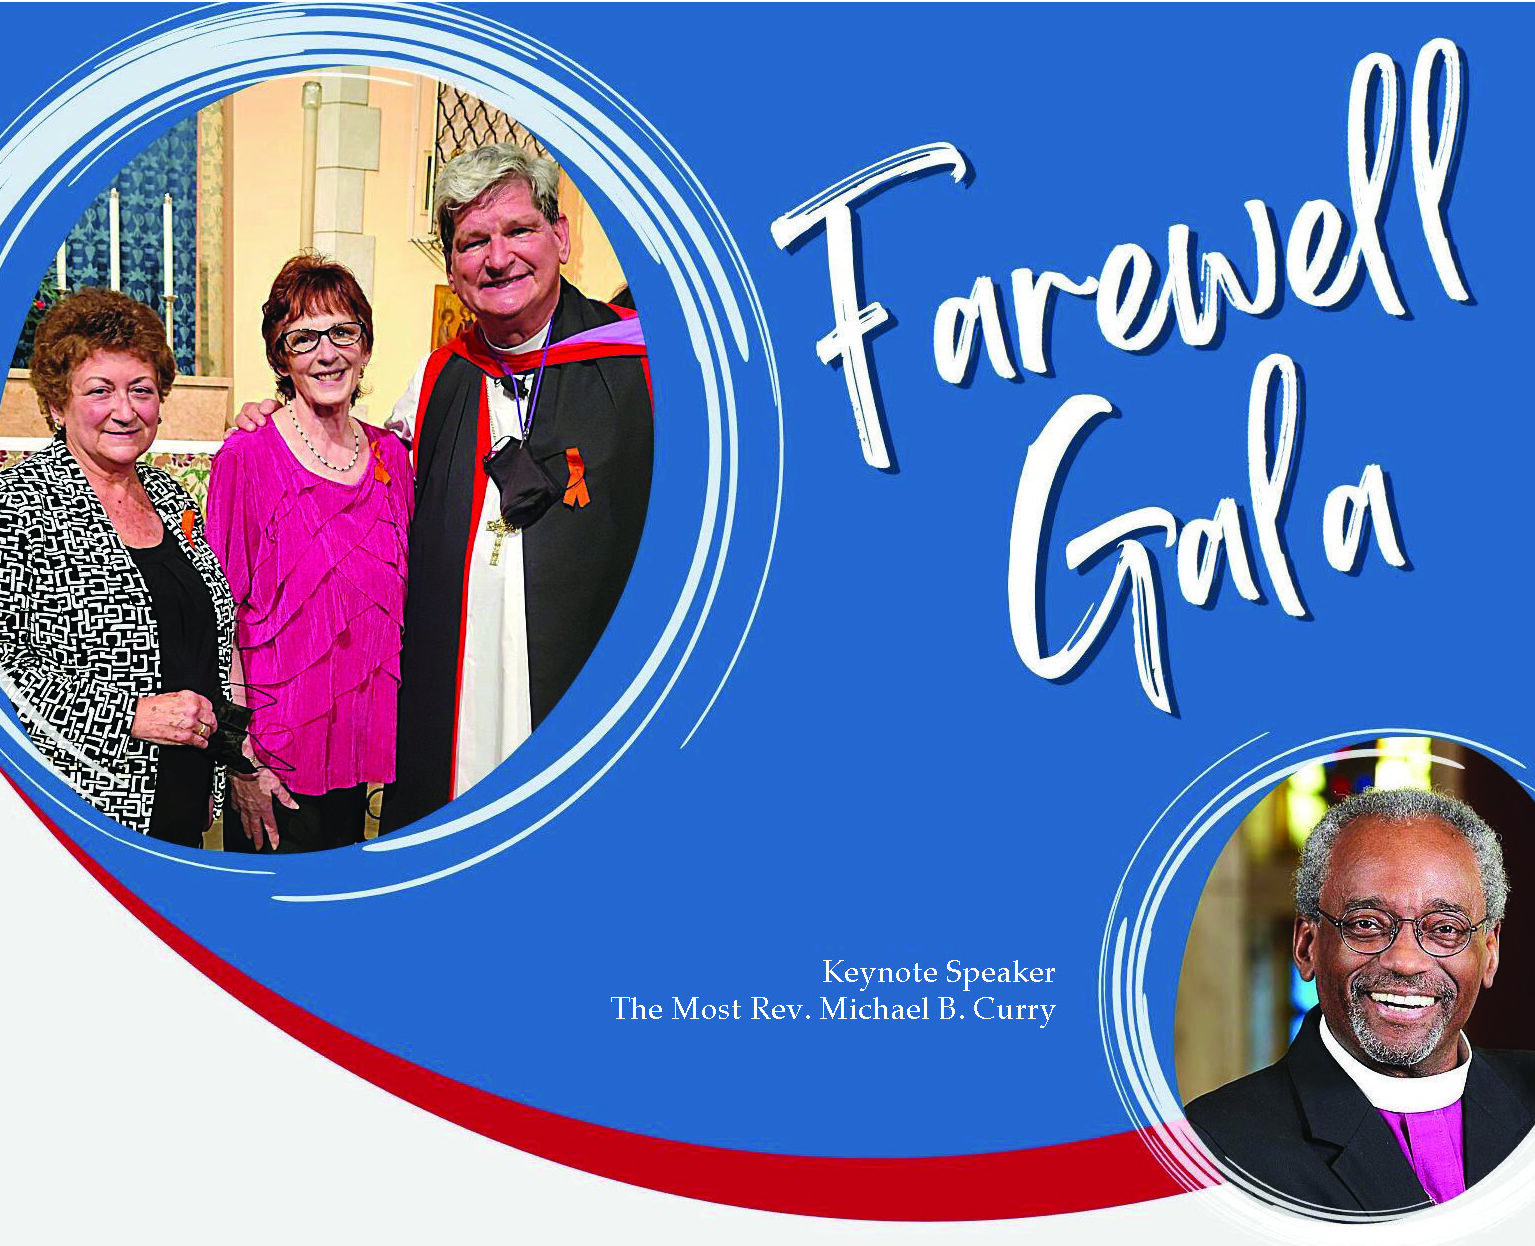 The Farewell Gala celebrating the ministries of Bishop Stokes, Mrs. Susan Stokes, Canon Ann Notte, and Canon Mary Ann Rhoads, and featuring keynote speaker, Bishop MIchael Curry, will be live on the diocesan Web site Sunday at 7:00 at dioceseofnj.org/live